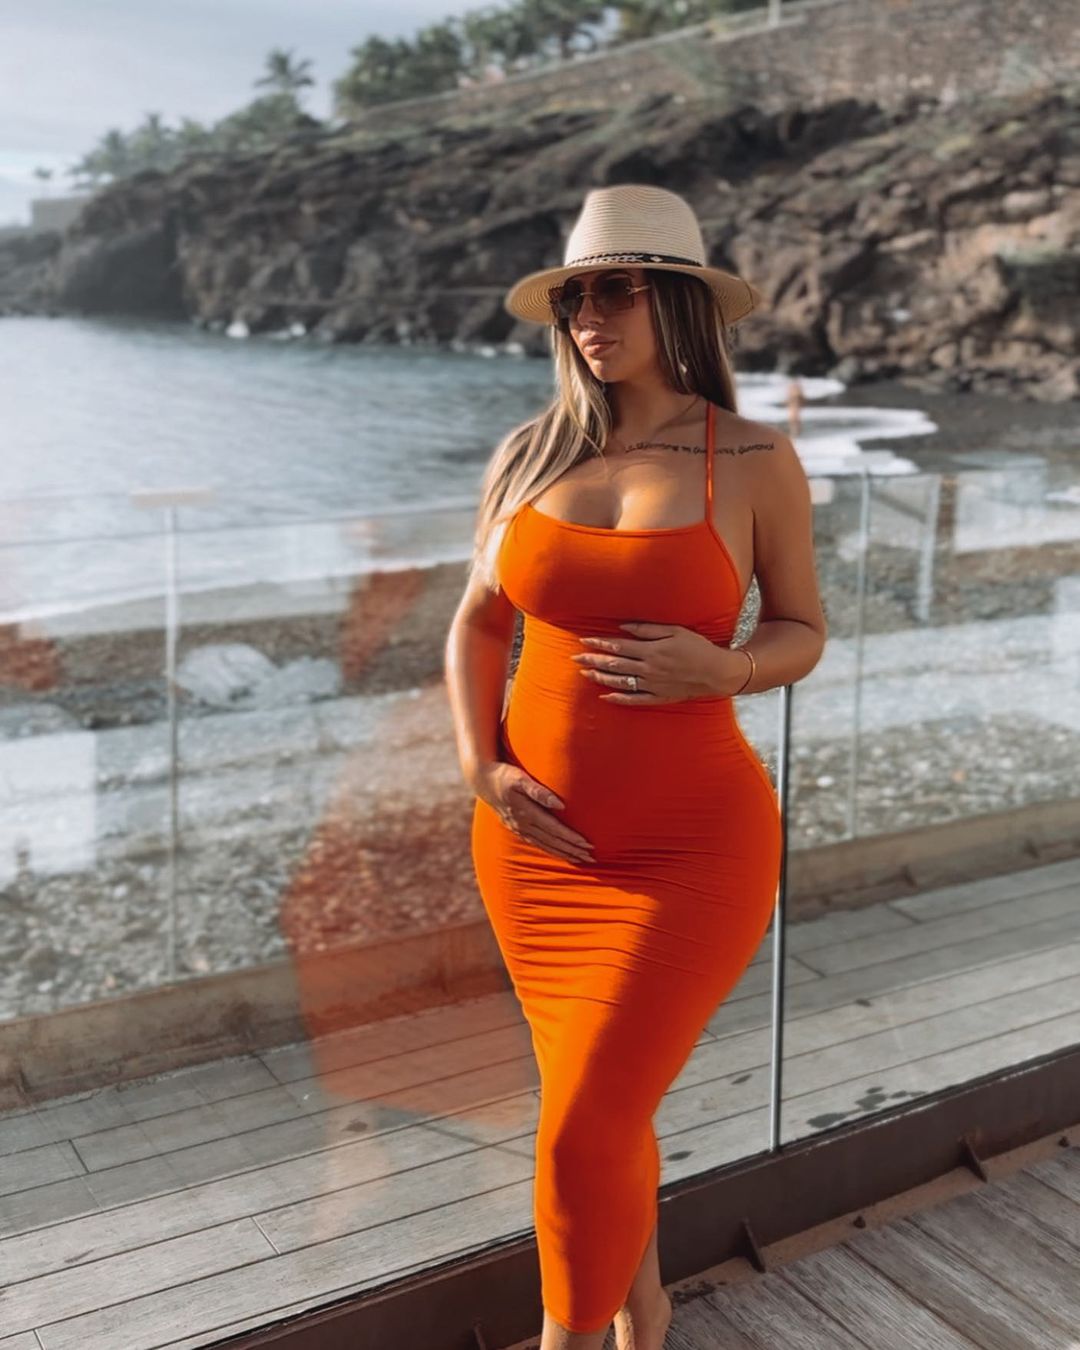 Pregnant Holly Hagan reveals unborn baby’s gender at second wedding filmed for Geordie Shore